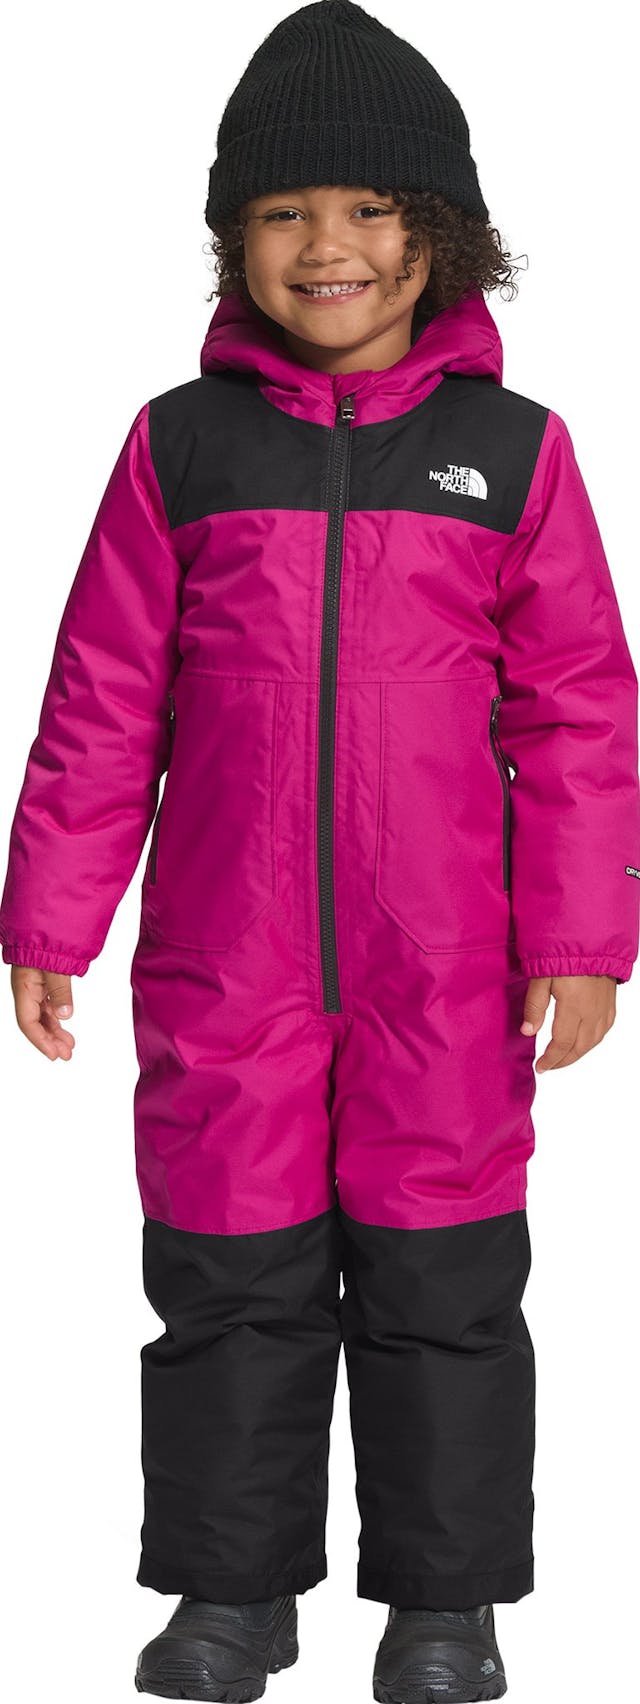 Product image for Freedom Snowsuit - Kids